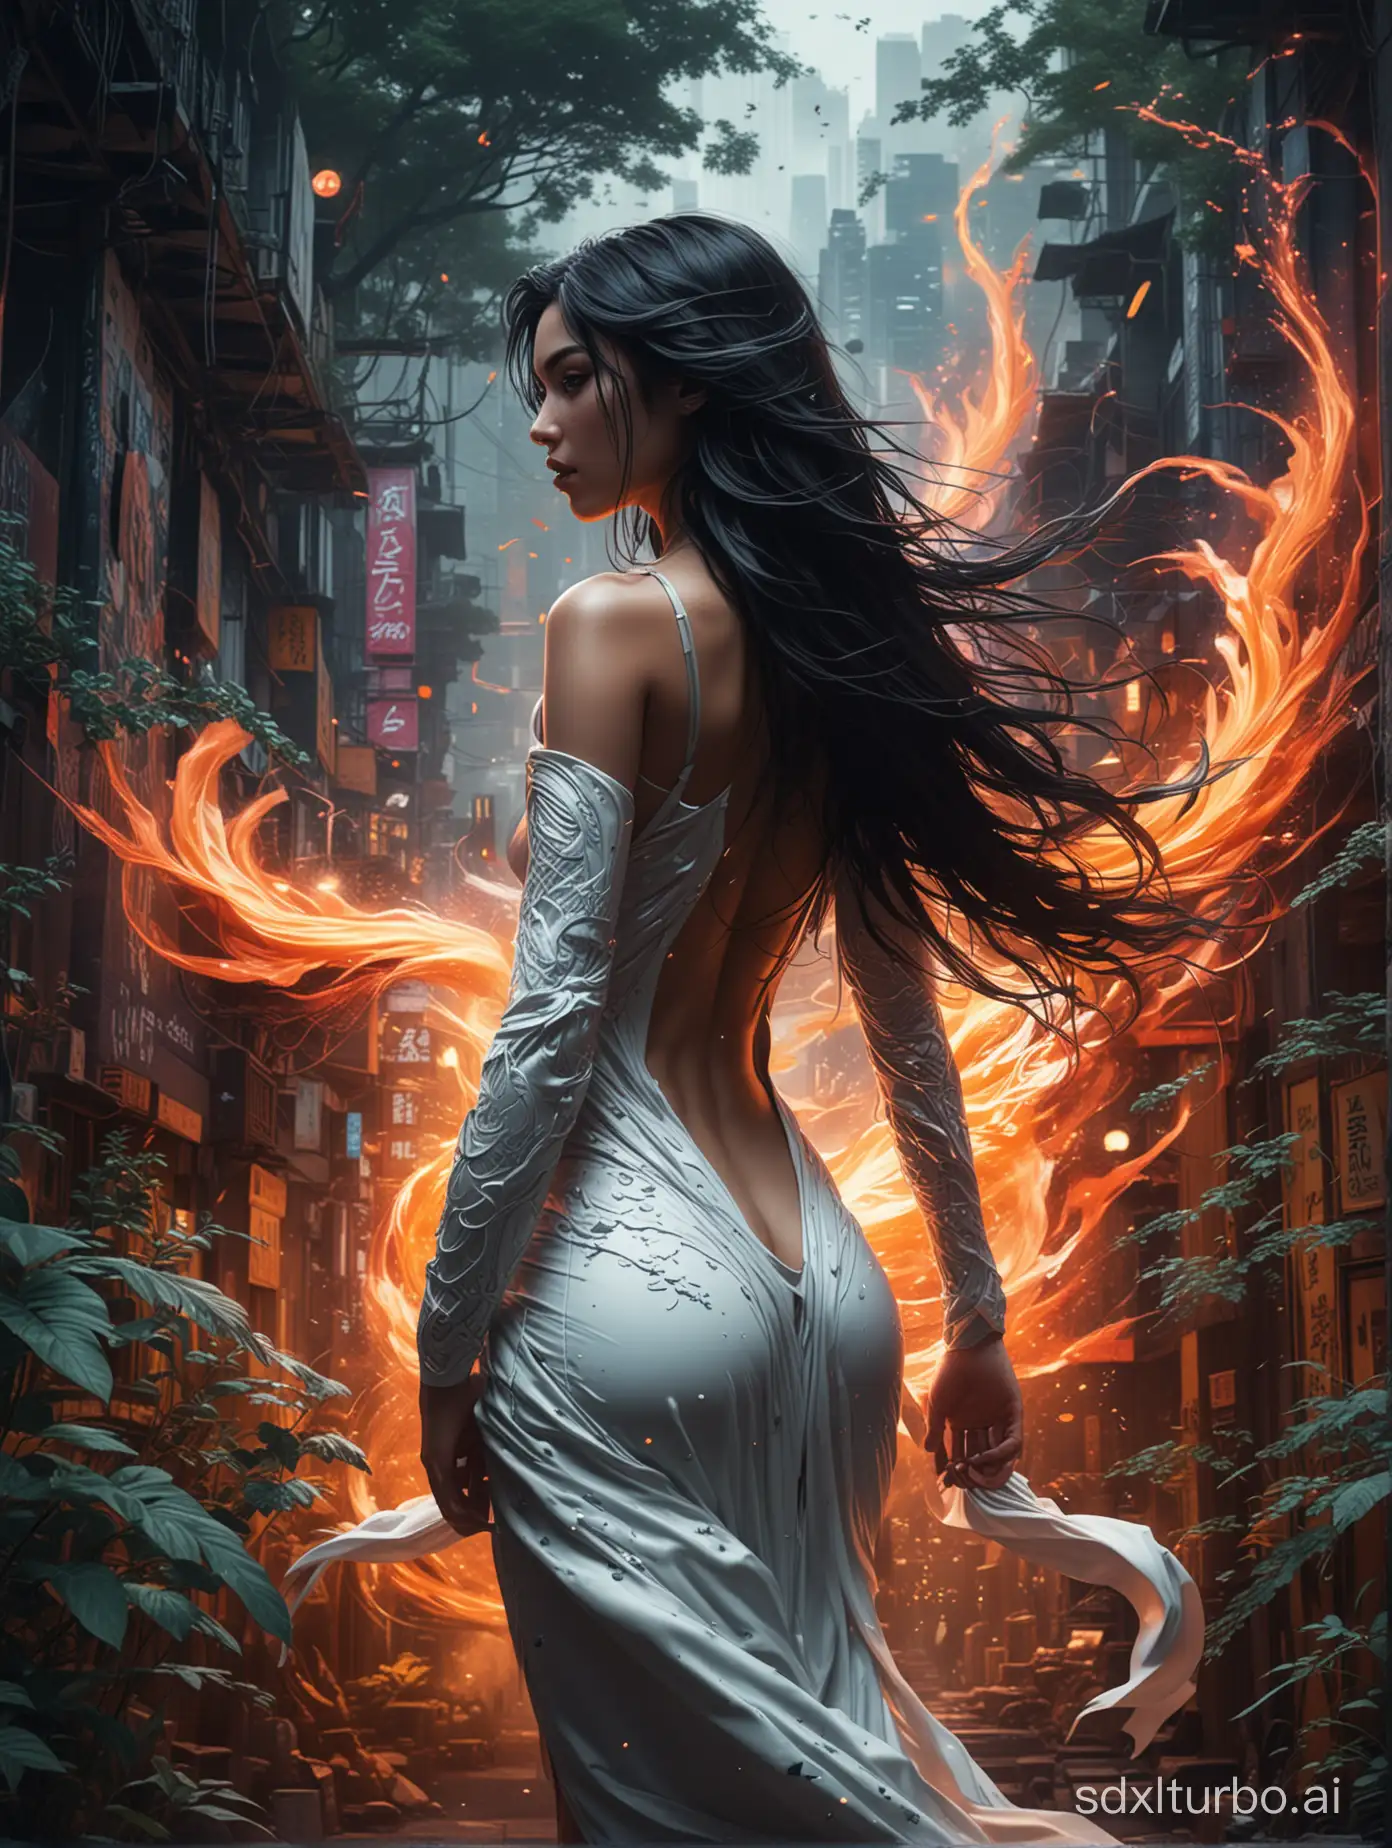 A captivating and enigmatic artwork featuring a powerful, futuristic warrior woman. She is so saxy big ass, adding a science-fiction touch to her appearance. The warrior's long, black hair flows down her back like a fiery explosion of colors, with strands swirling around her. Her intense gaze captivates viewers, while her short, low-cut white dress adds an air of elegance and sophistication. The background is a vibrant and conceptual wilderness, filled with lush greenery and a mysterious, dimly lit atmosphere. The overall ambiance is a blend of dark fantasy, cinematic, and illustrative elements, creating an unforgettable and mesmerizing visual experience., conceptual art, product, ukiyo-e, fashion, 3d render, illustration, vibrant, photo, dark fantasy, architecture, graffiti, typography, anime, poster, wildlife photography, painting, portrait photography, cinematic